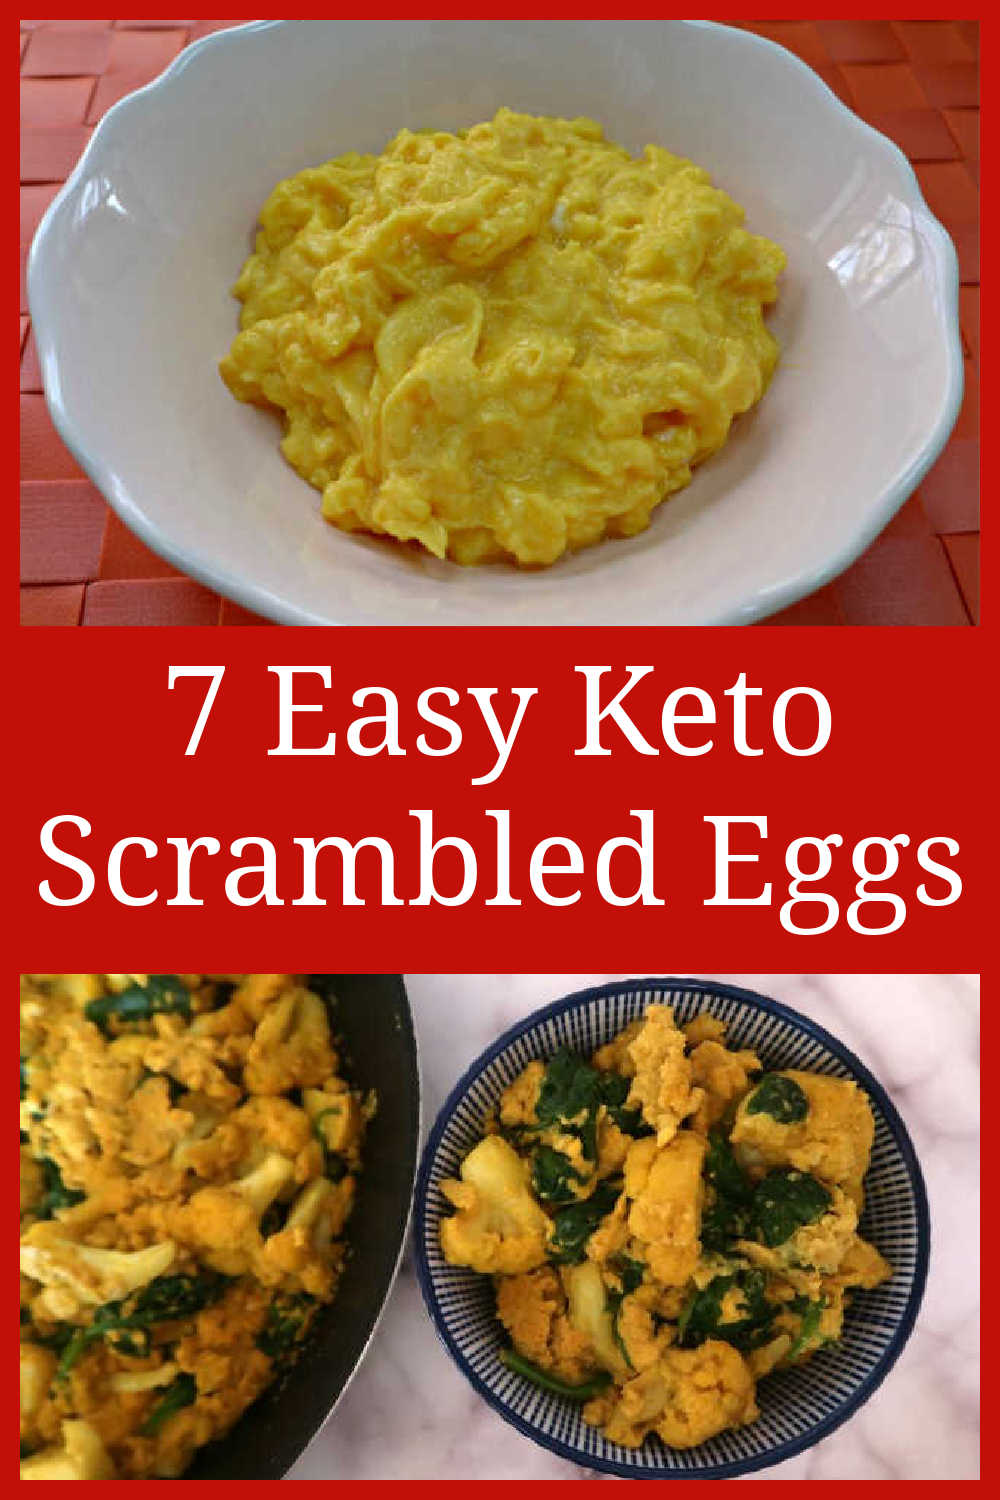 Keto Scrambled Eggs - 7 Easy Ways To Make The Best Cheesy Low Carb Fluffy Breakfast Scramble Meals with cheese and other simple ingredients that are creamy, high protein and low in net carbs.